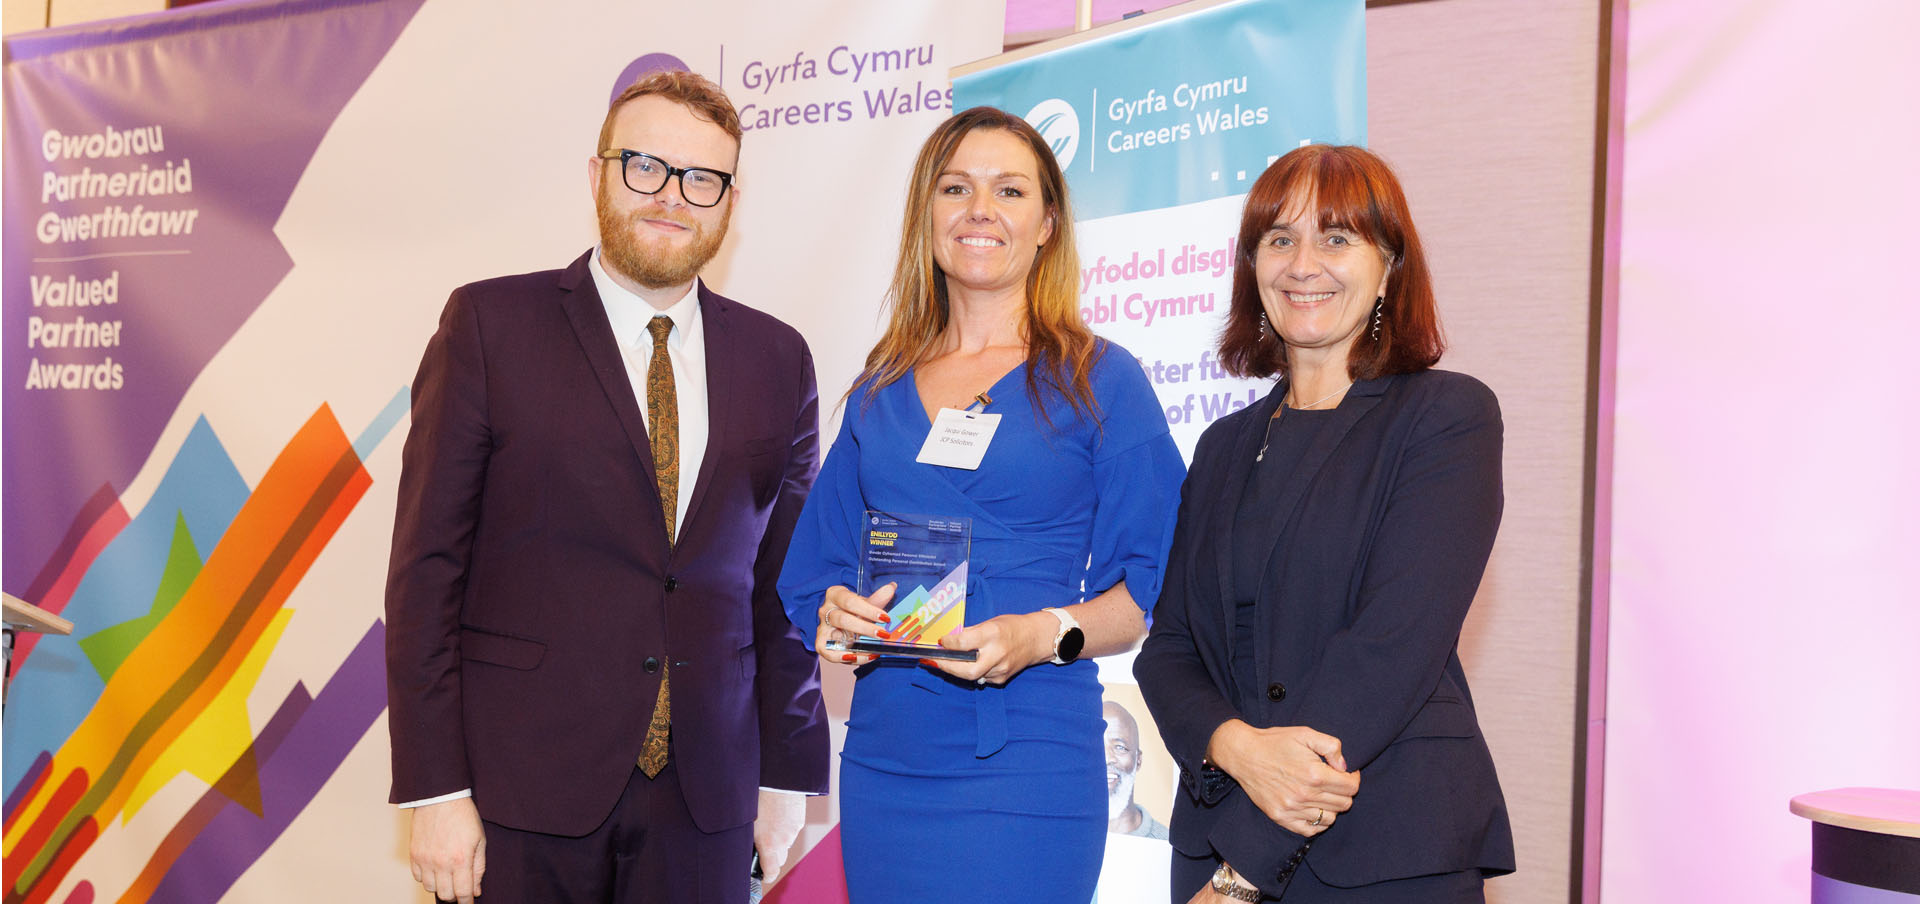 Jacqui Gower from JCP Solicitors being presented with their award by presenter Huw Stephens and Nikki Lawrence, Chief Executive, Careers Wales